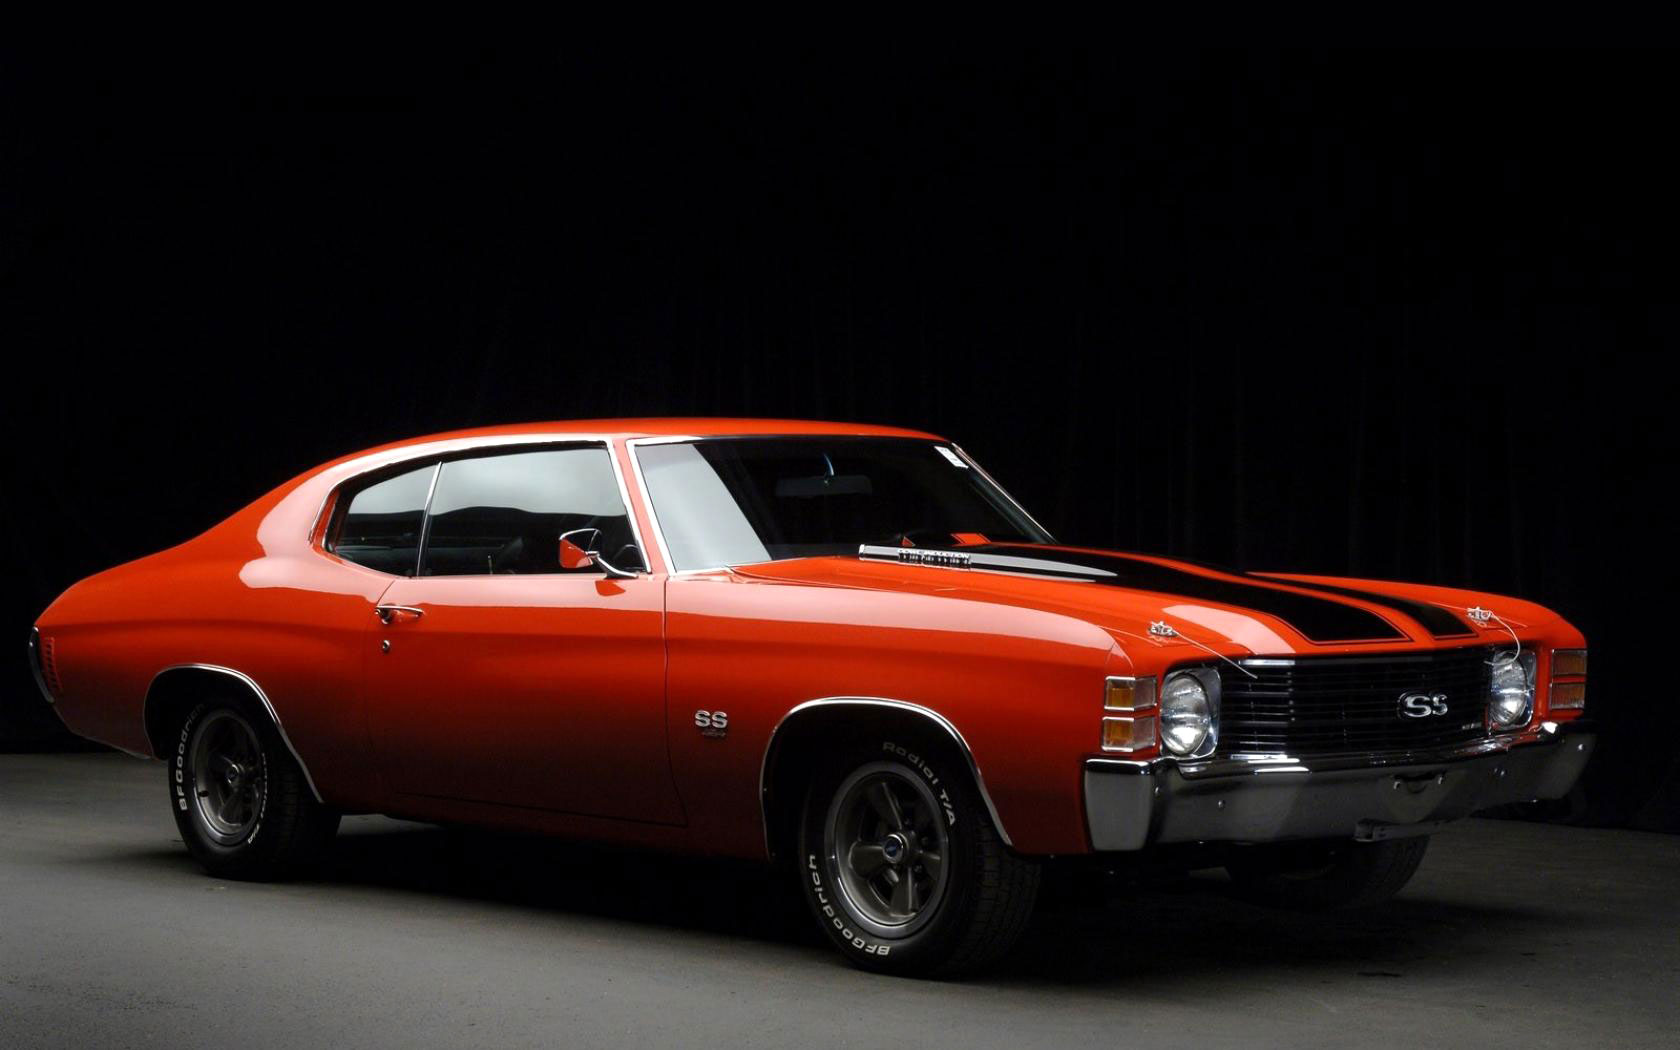 Chevrolet Chevelle Ss Sports Cars Photo